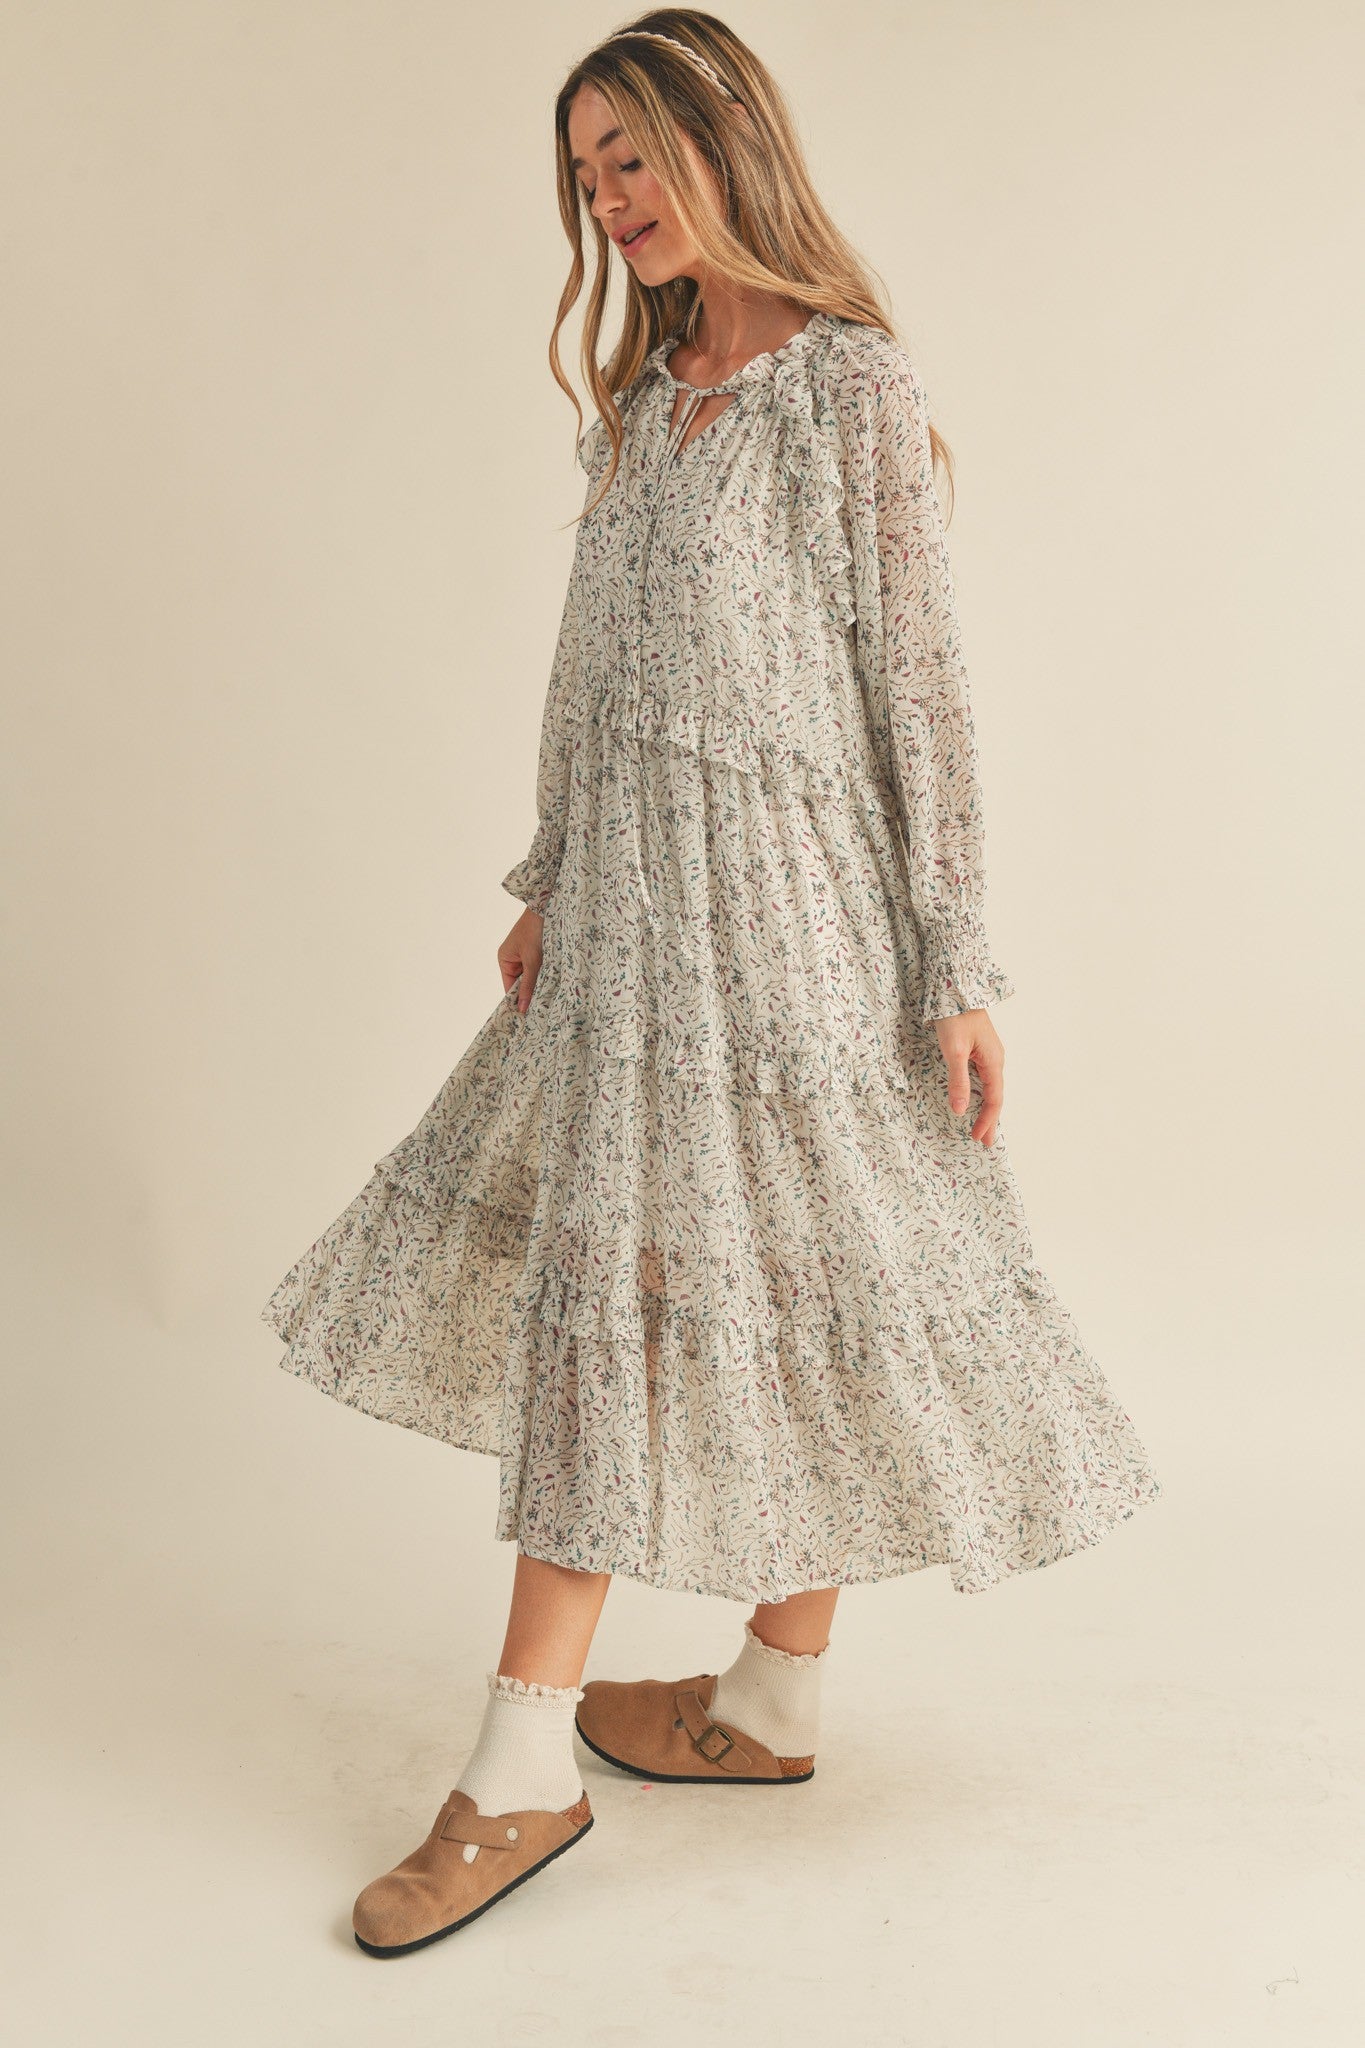 The Bryce Floral Dress